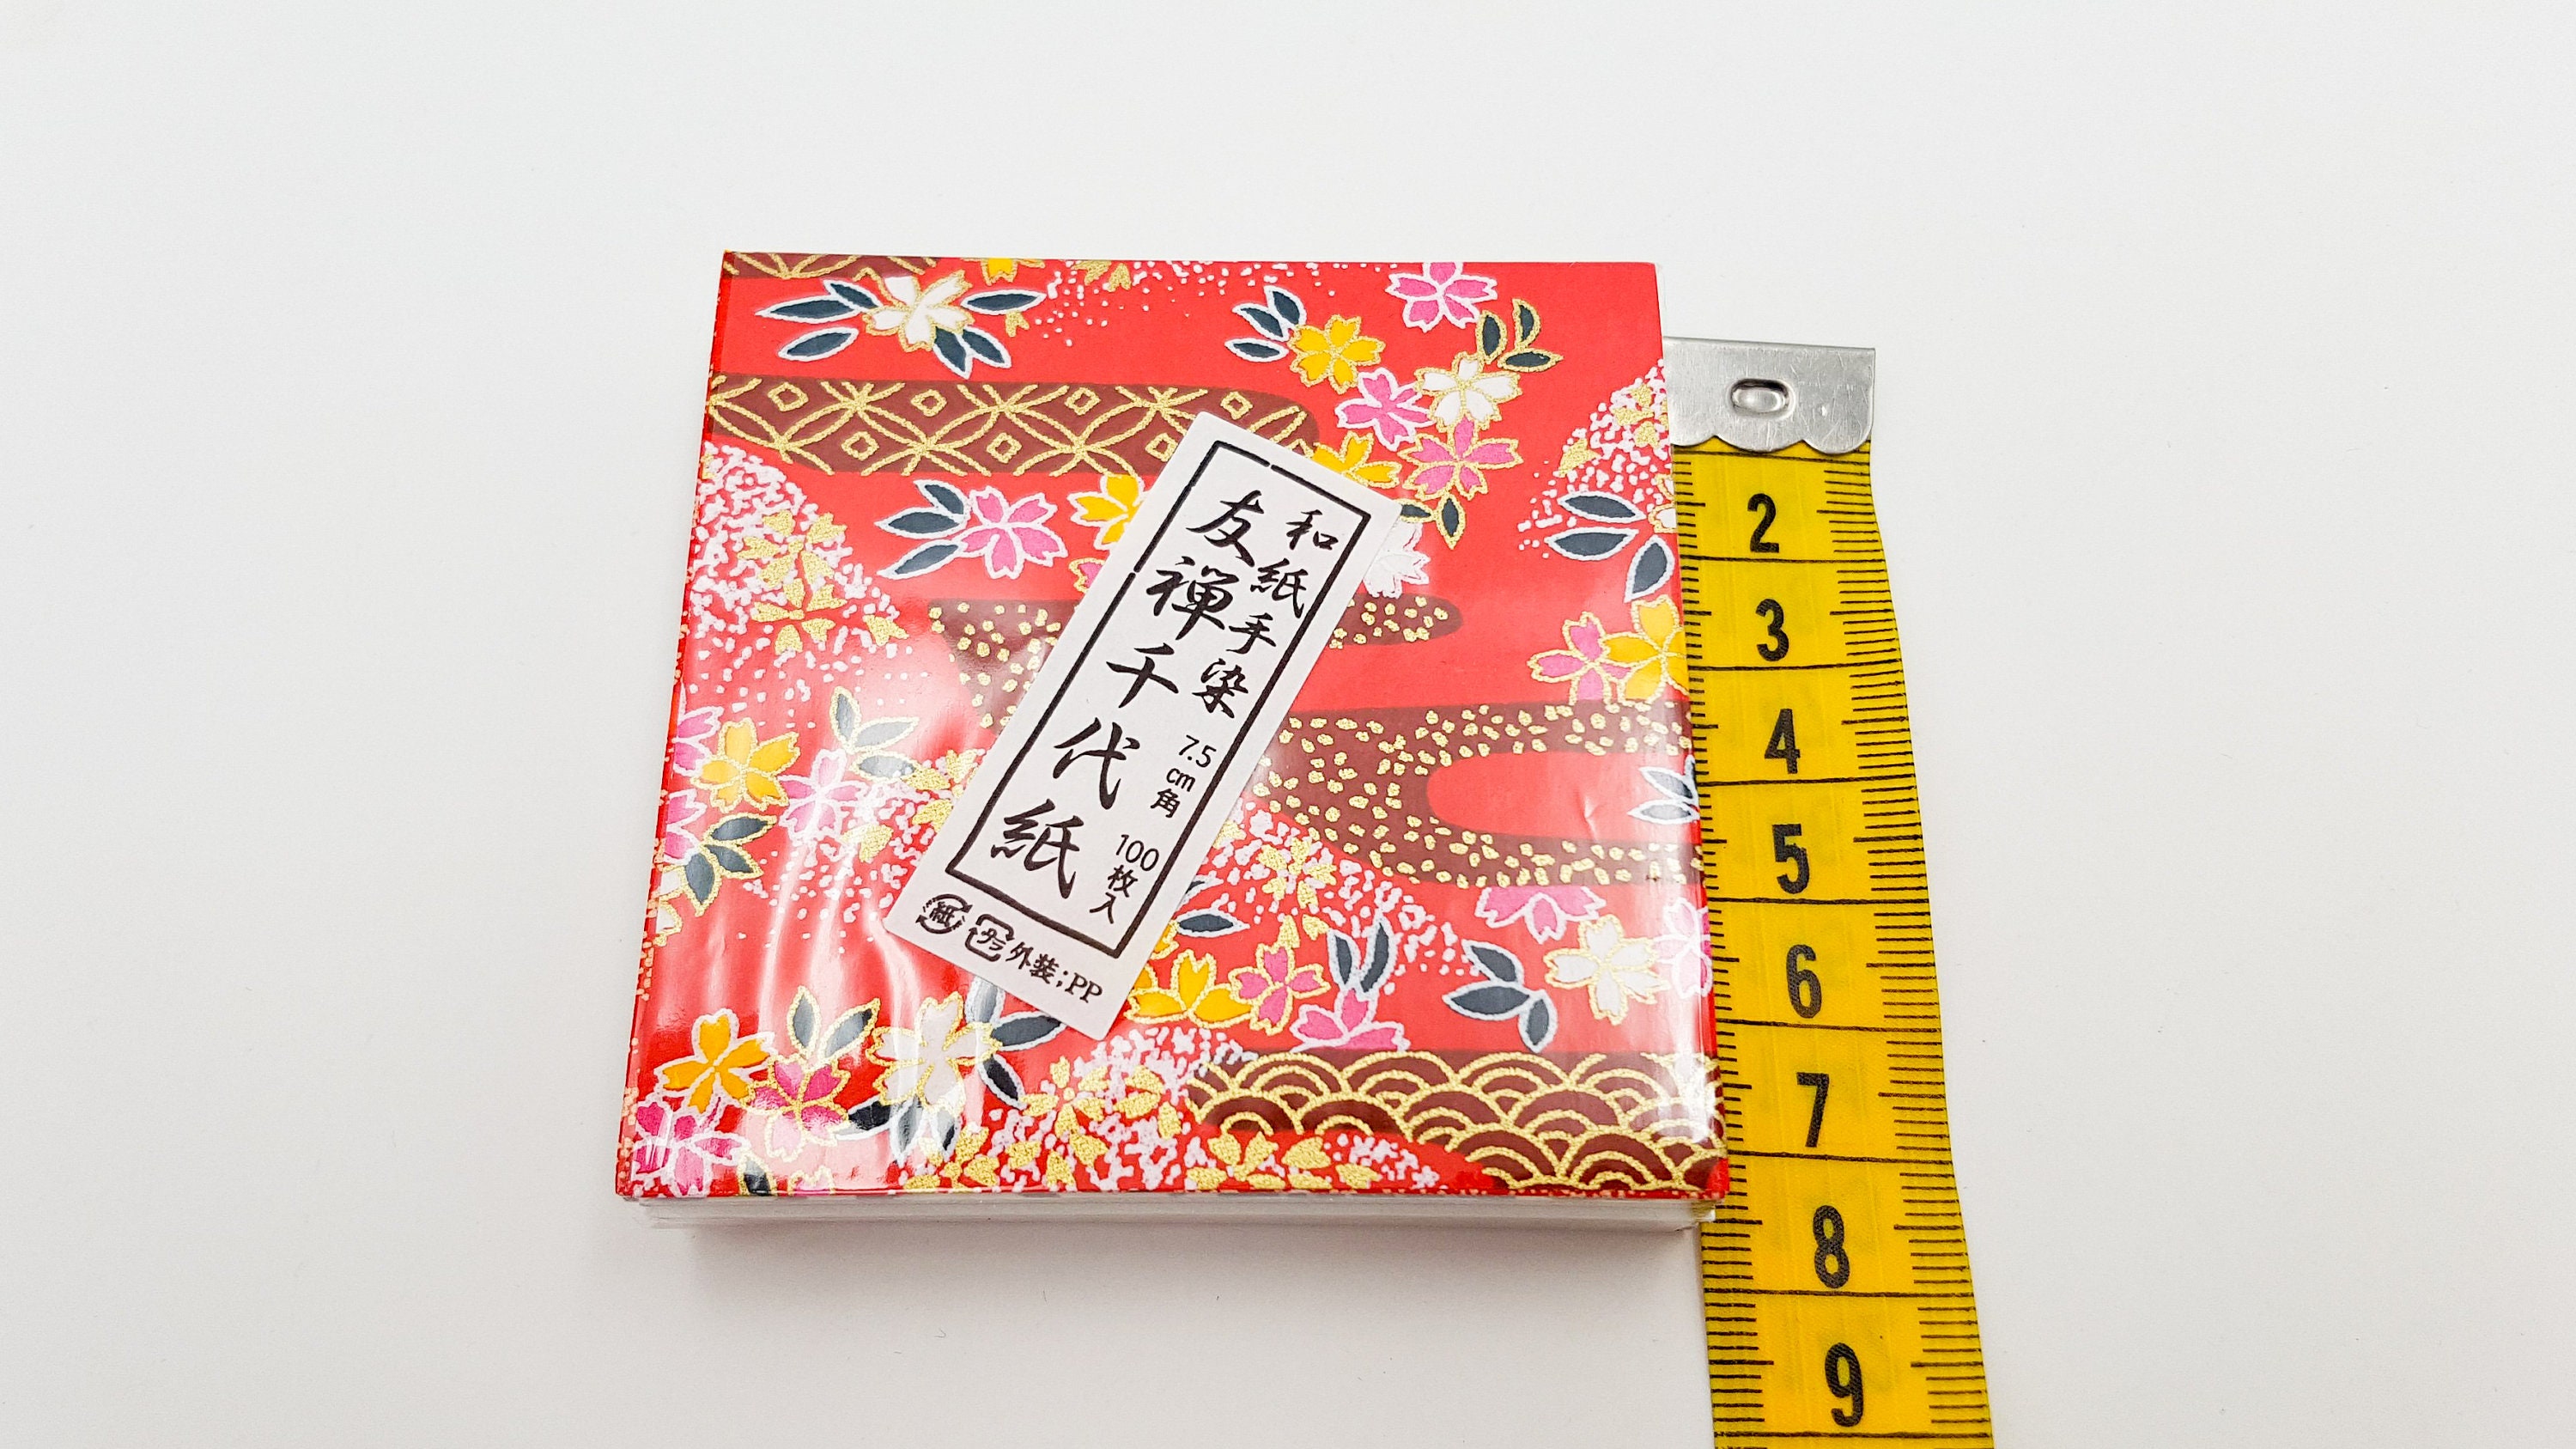 Lot Block 100 Sheets of Japanese Paper From Kyoto for Origami Folding 